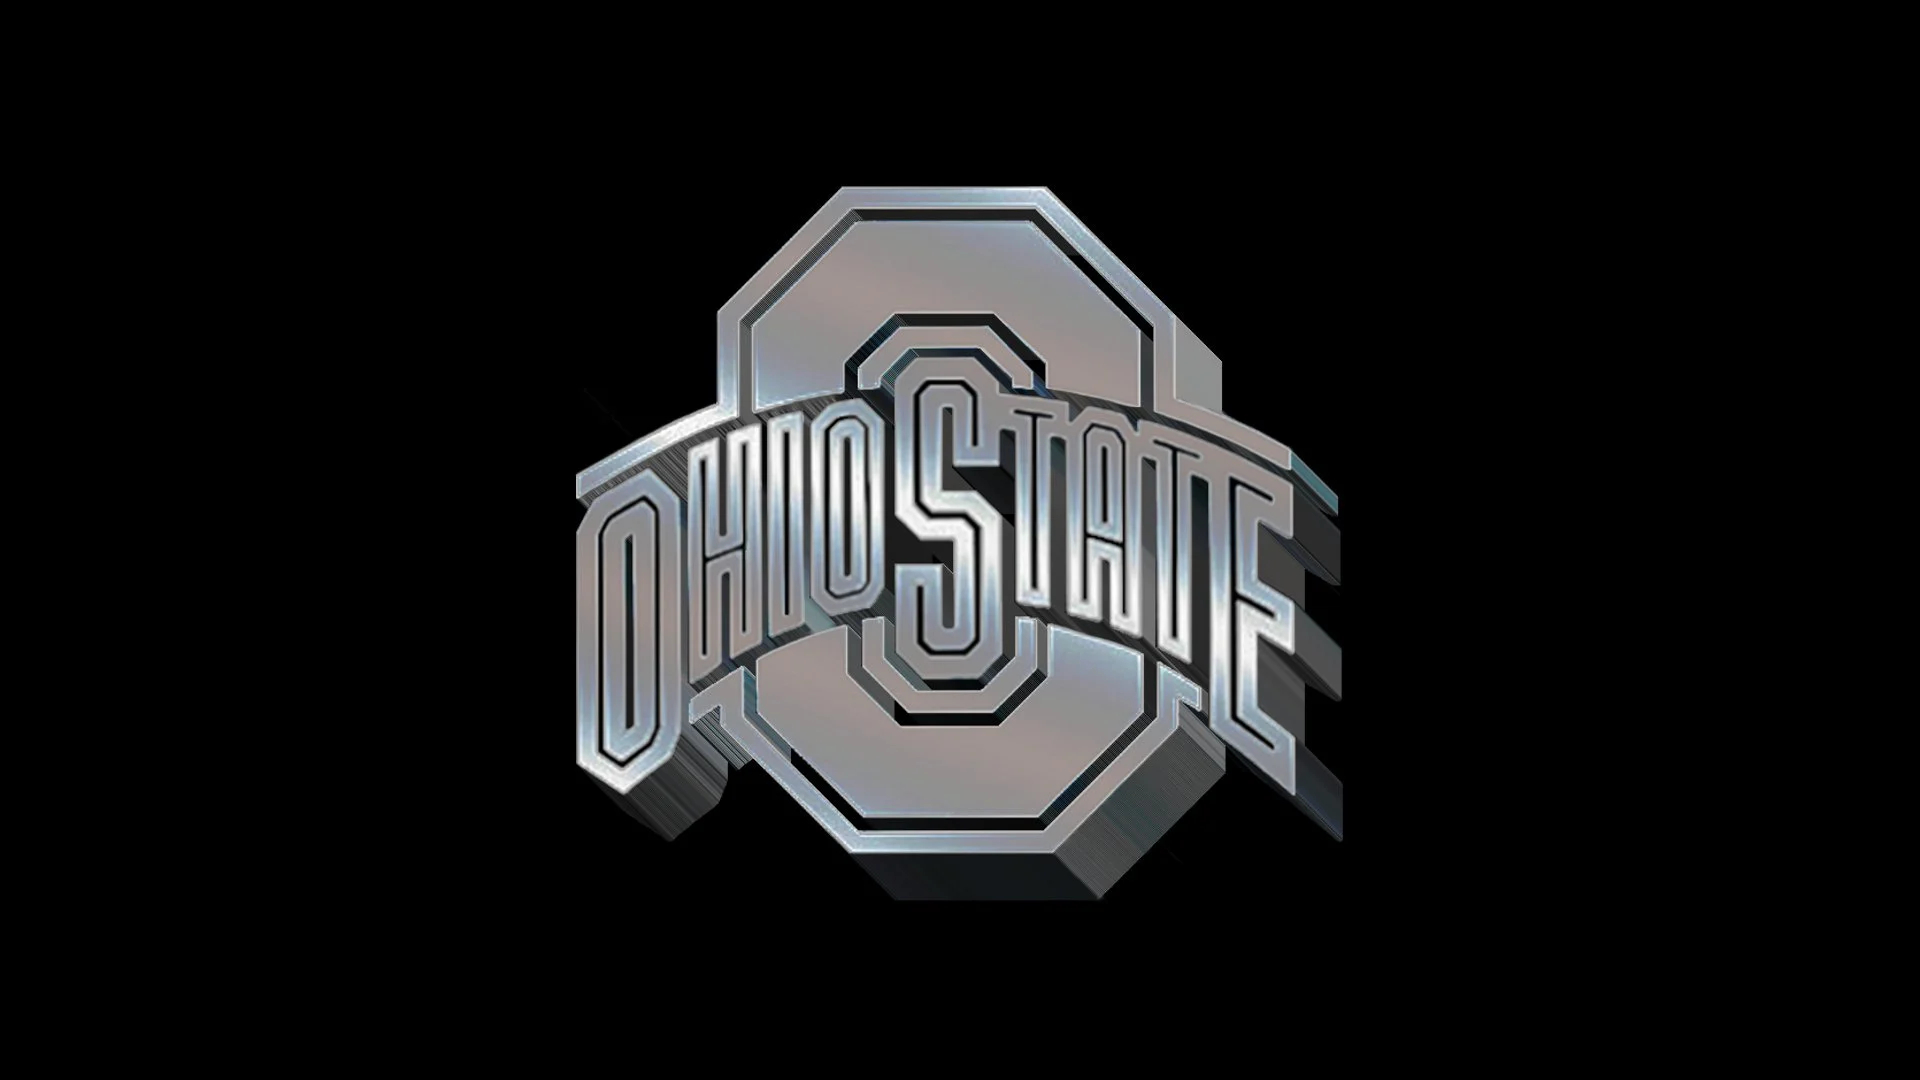 1920x1080 Free download OSU Wallpaper 406 Ohio State Football Wallpaper 30109411 [] for your Desktop, Mobile \u0026 Tablet | Explore 49+ Ohio State Wallpapers for Desktop | Ohio State Football Wallpaper Pictures, HD